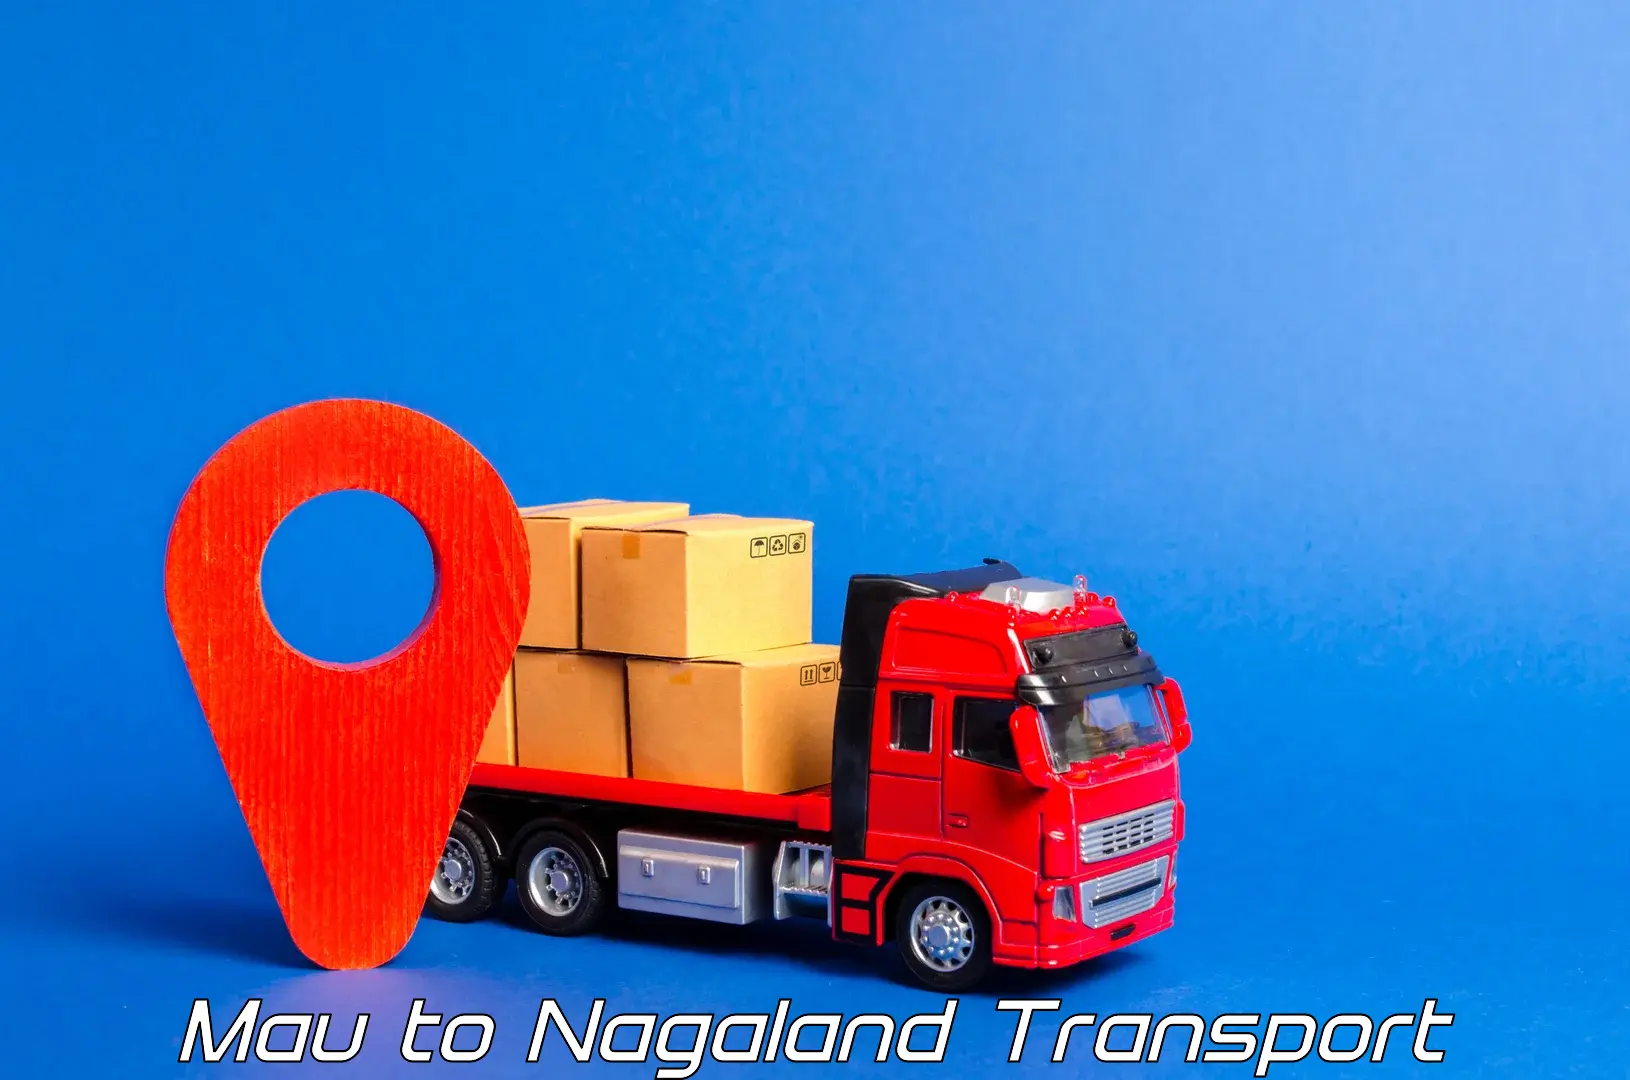 Truck transport companies in India Mau to Nagaland